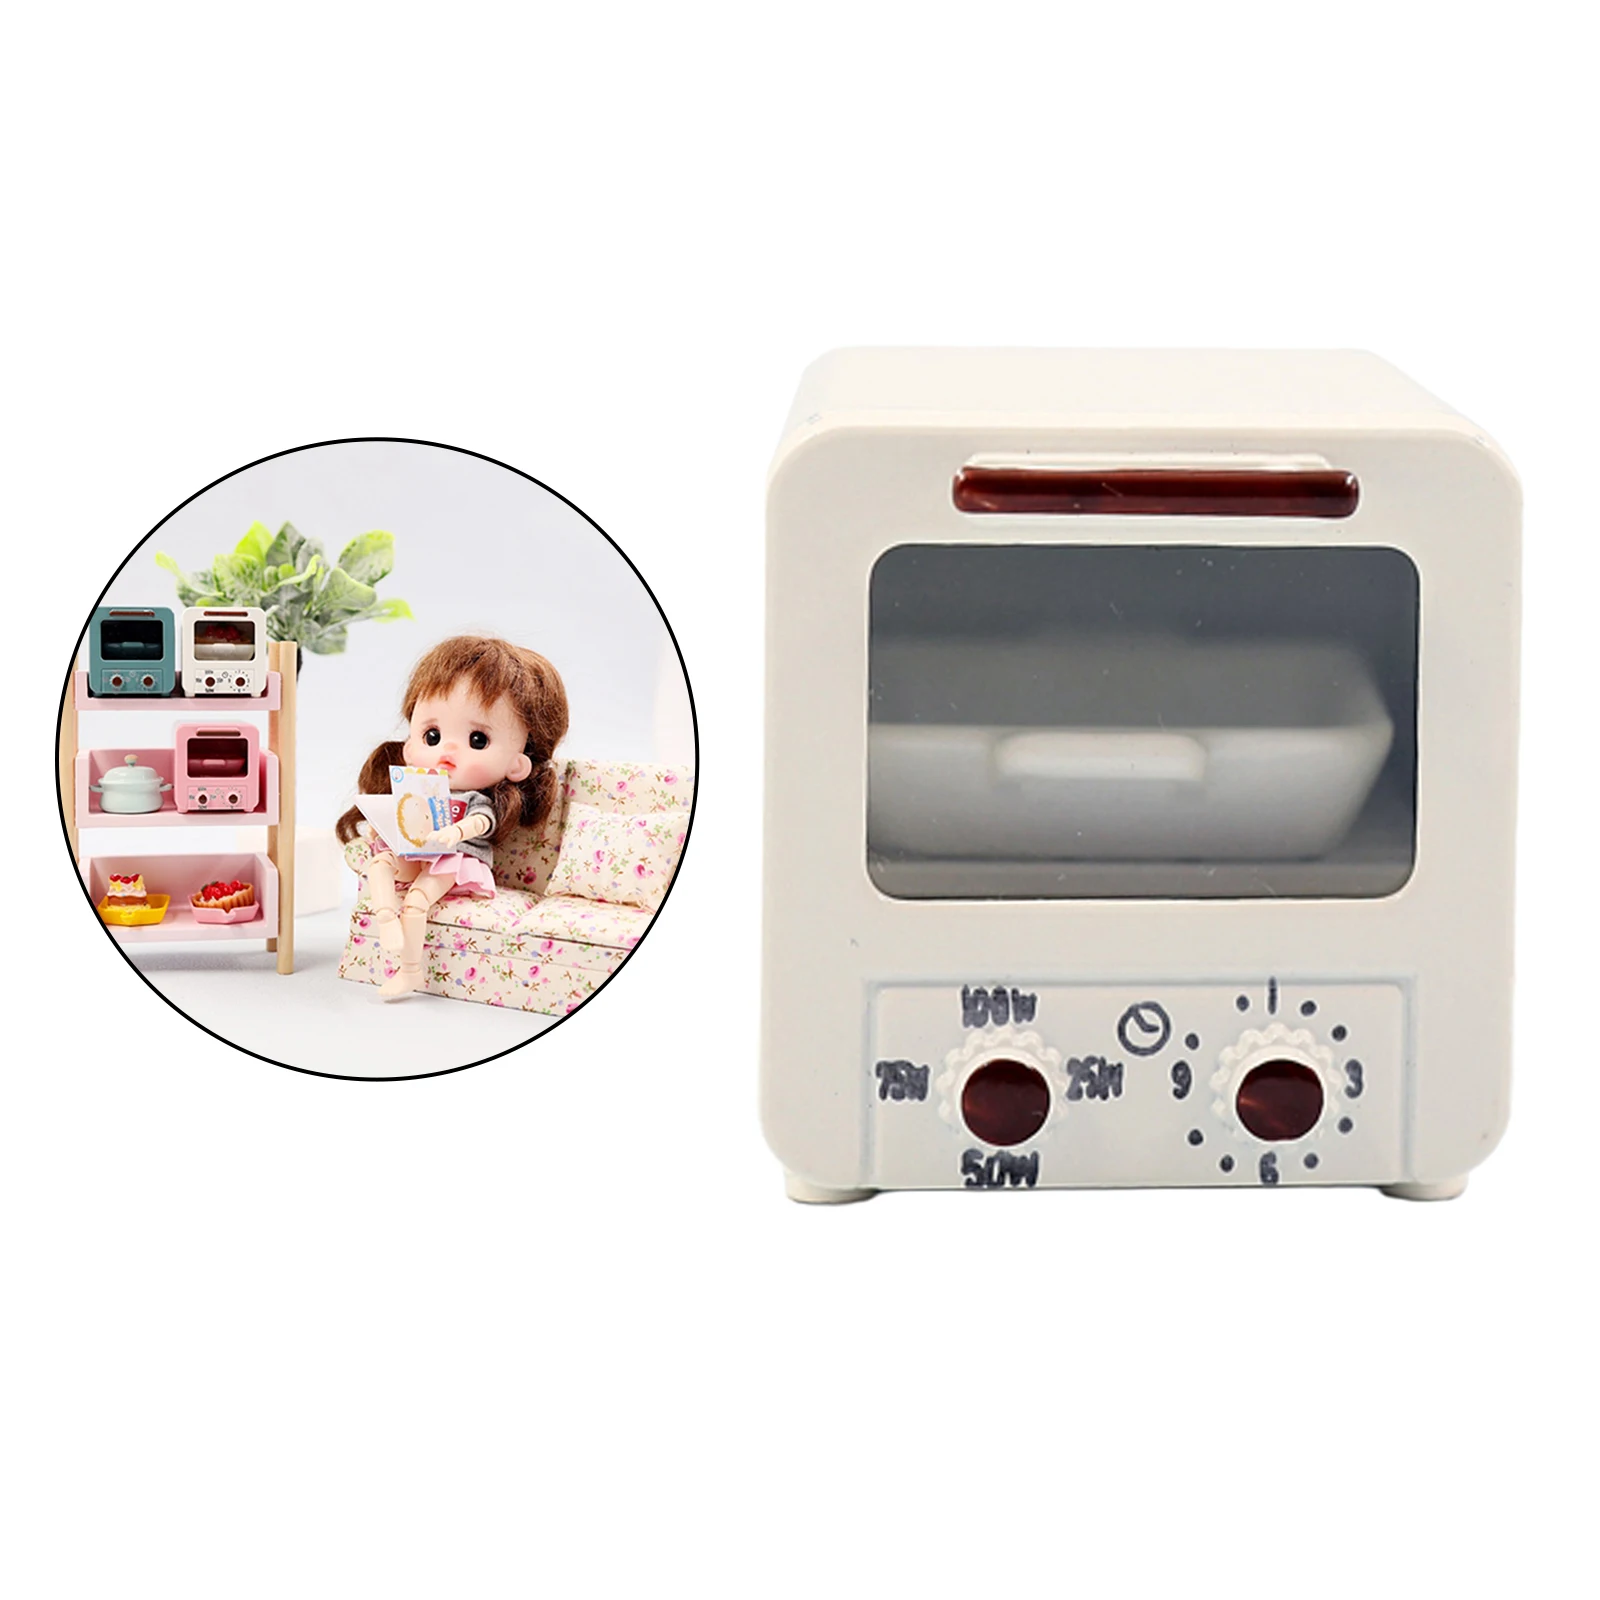 1:12 Mini Microwave Oven Display Model for 1/8 1/6 Miniature House Ornament